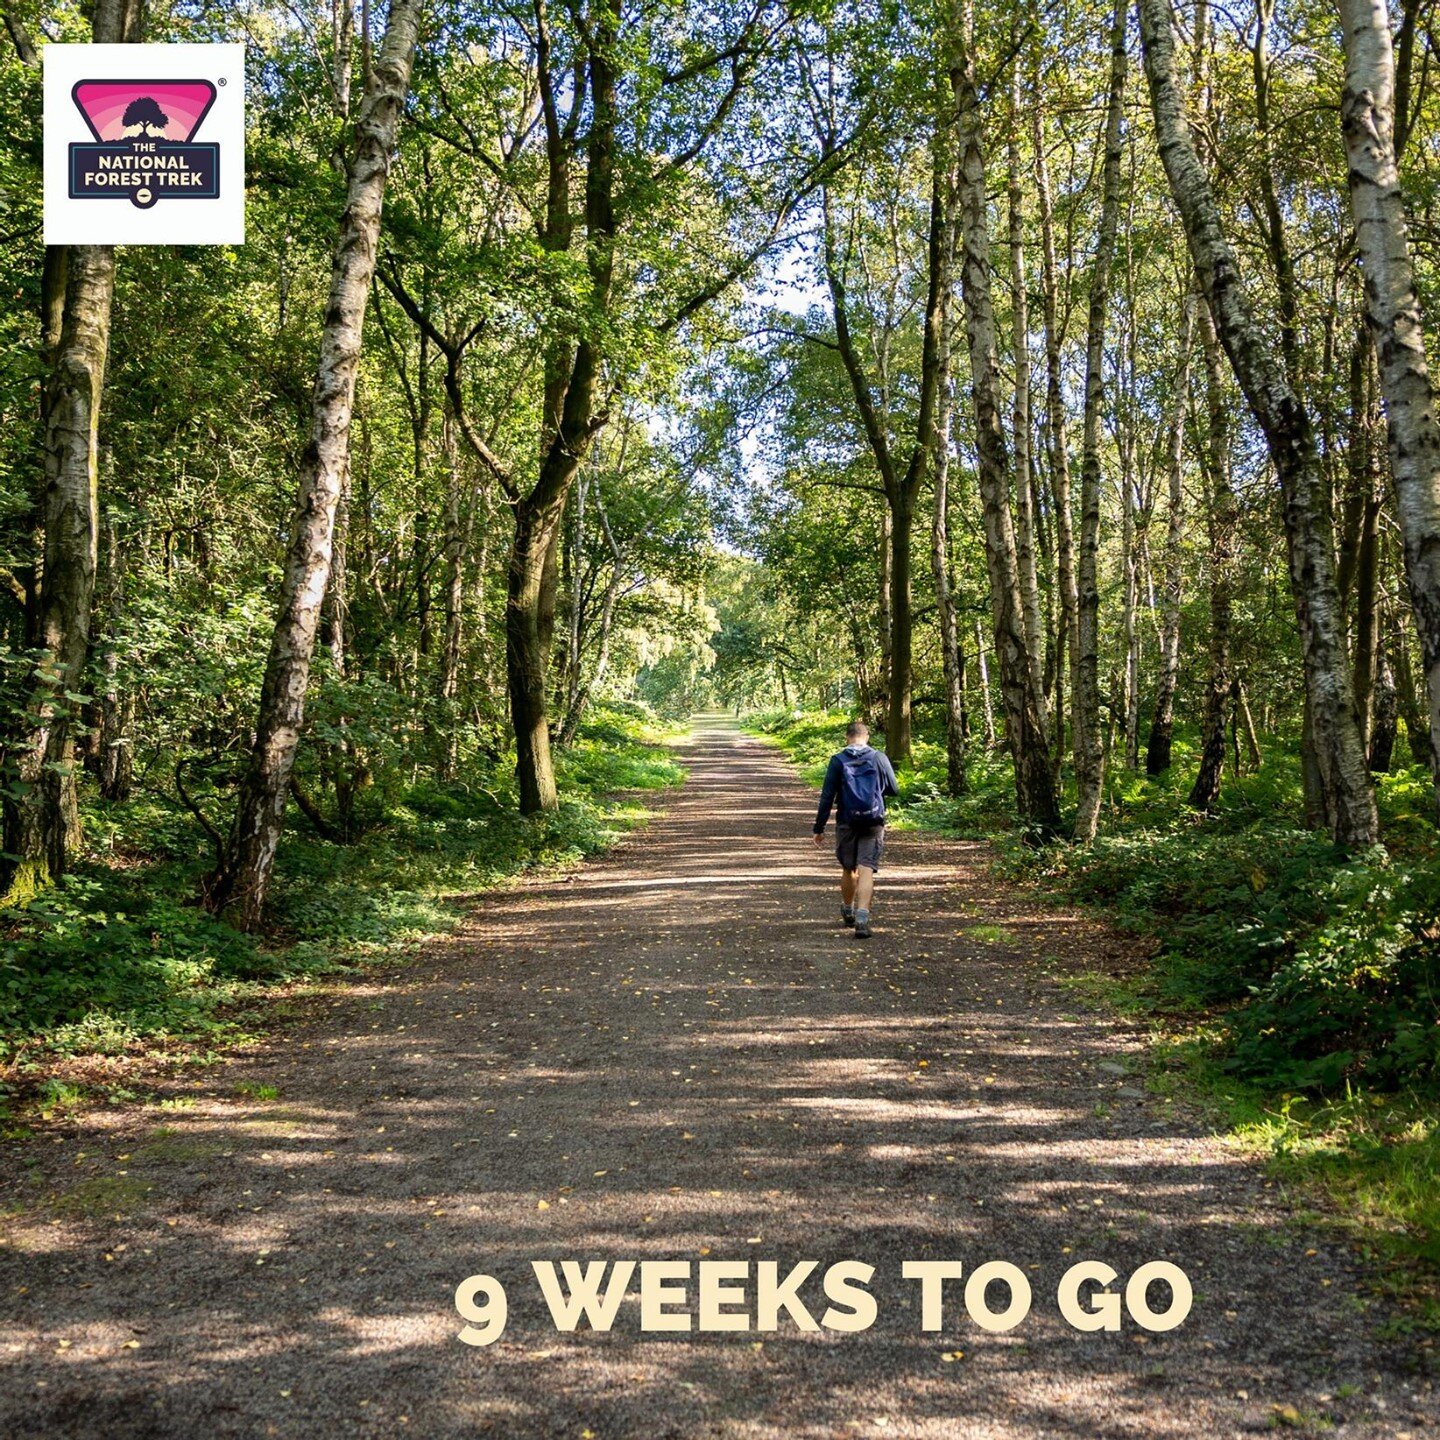 Just 8 weeks to go!⁠
⁠
We are pretty confident of a cooler trek than the temperatures we have been seeing this week.⁠
⁠
There is still time to sign up individually or as a team!⁠
⁠
https://www.nationalforesttrek.co.uk